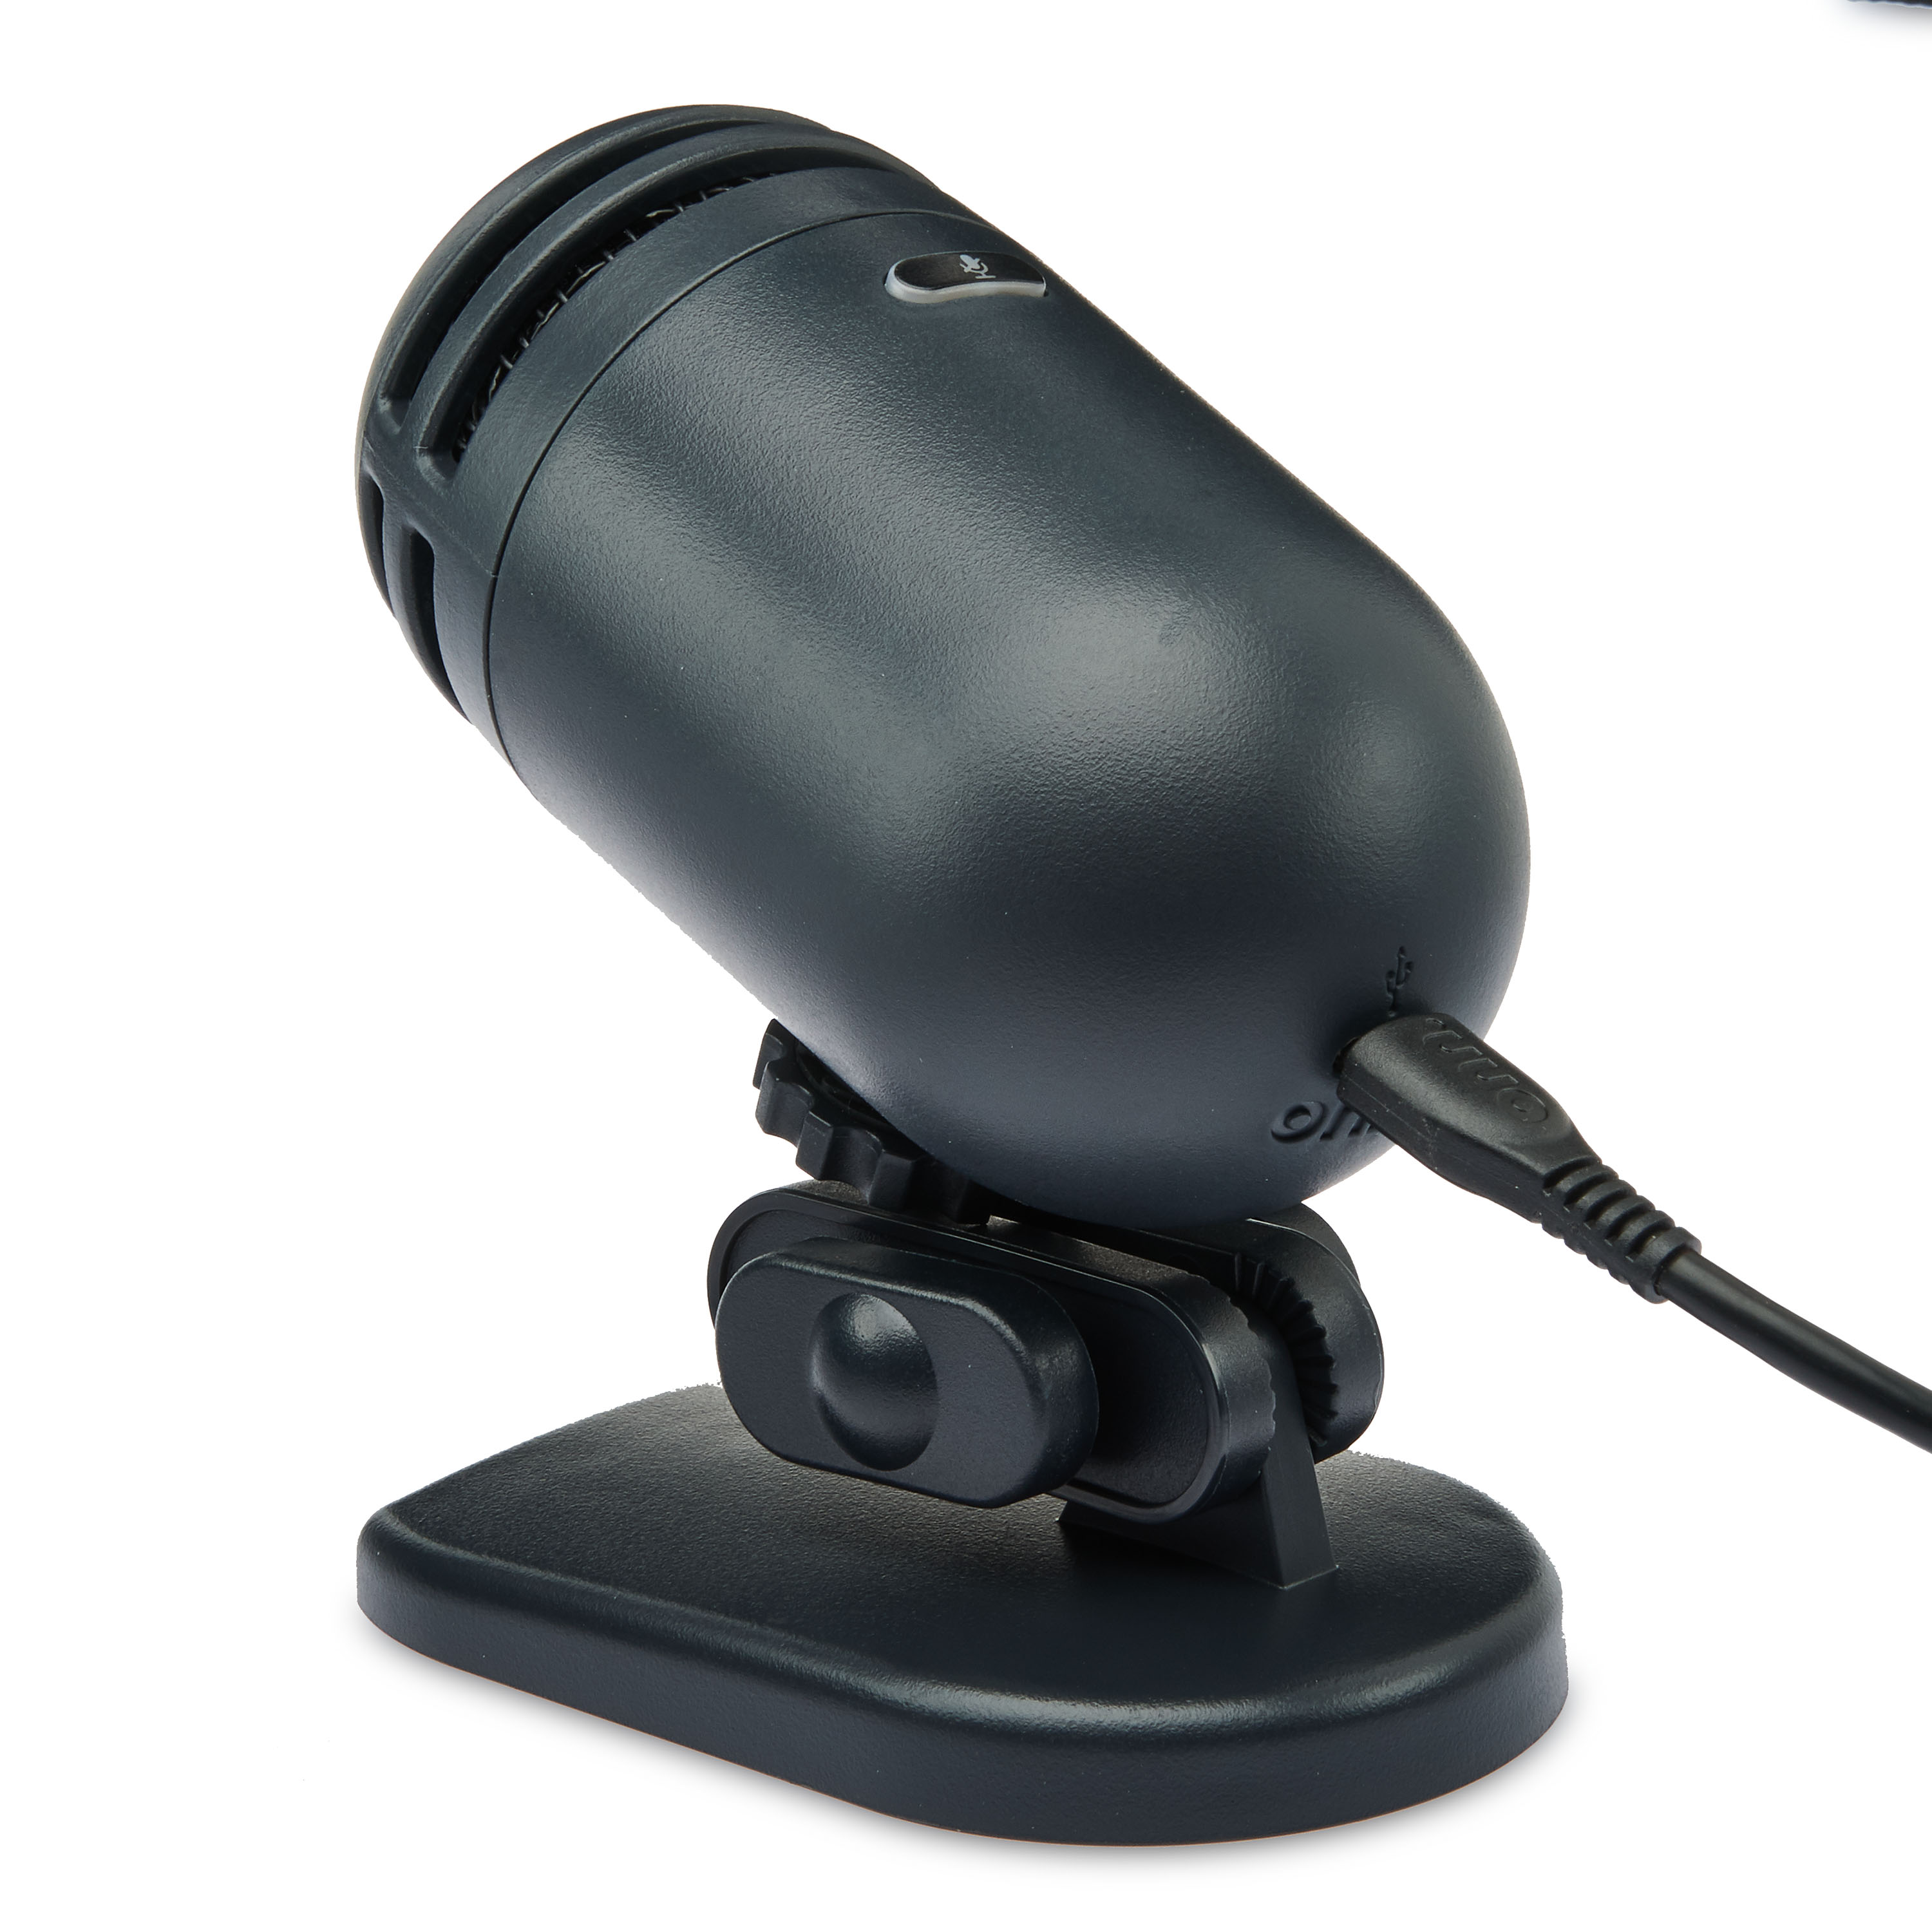 onn. USB Podcast Microphone with Cardioid Recording Pattern - image 3 of 9